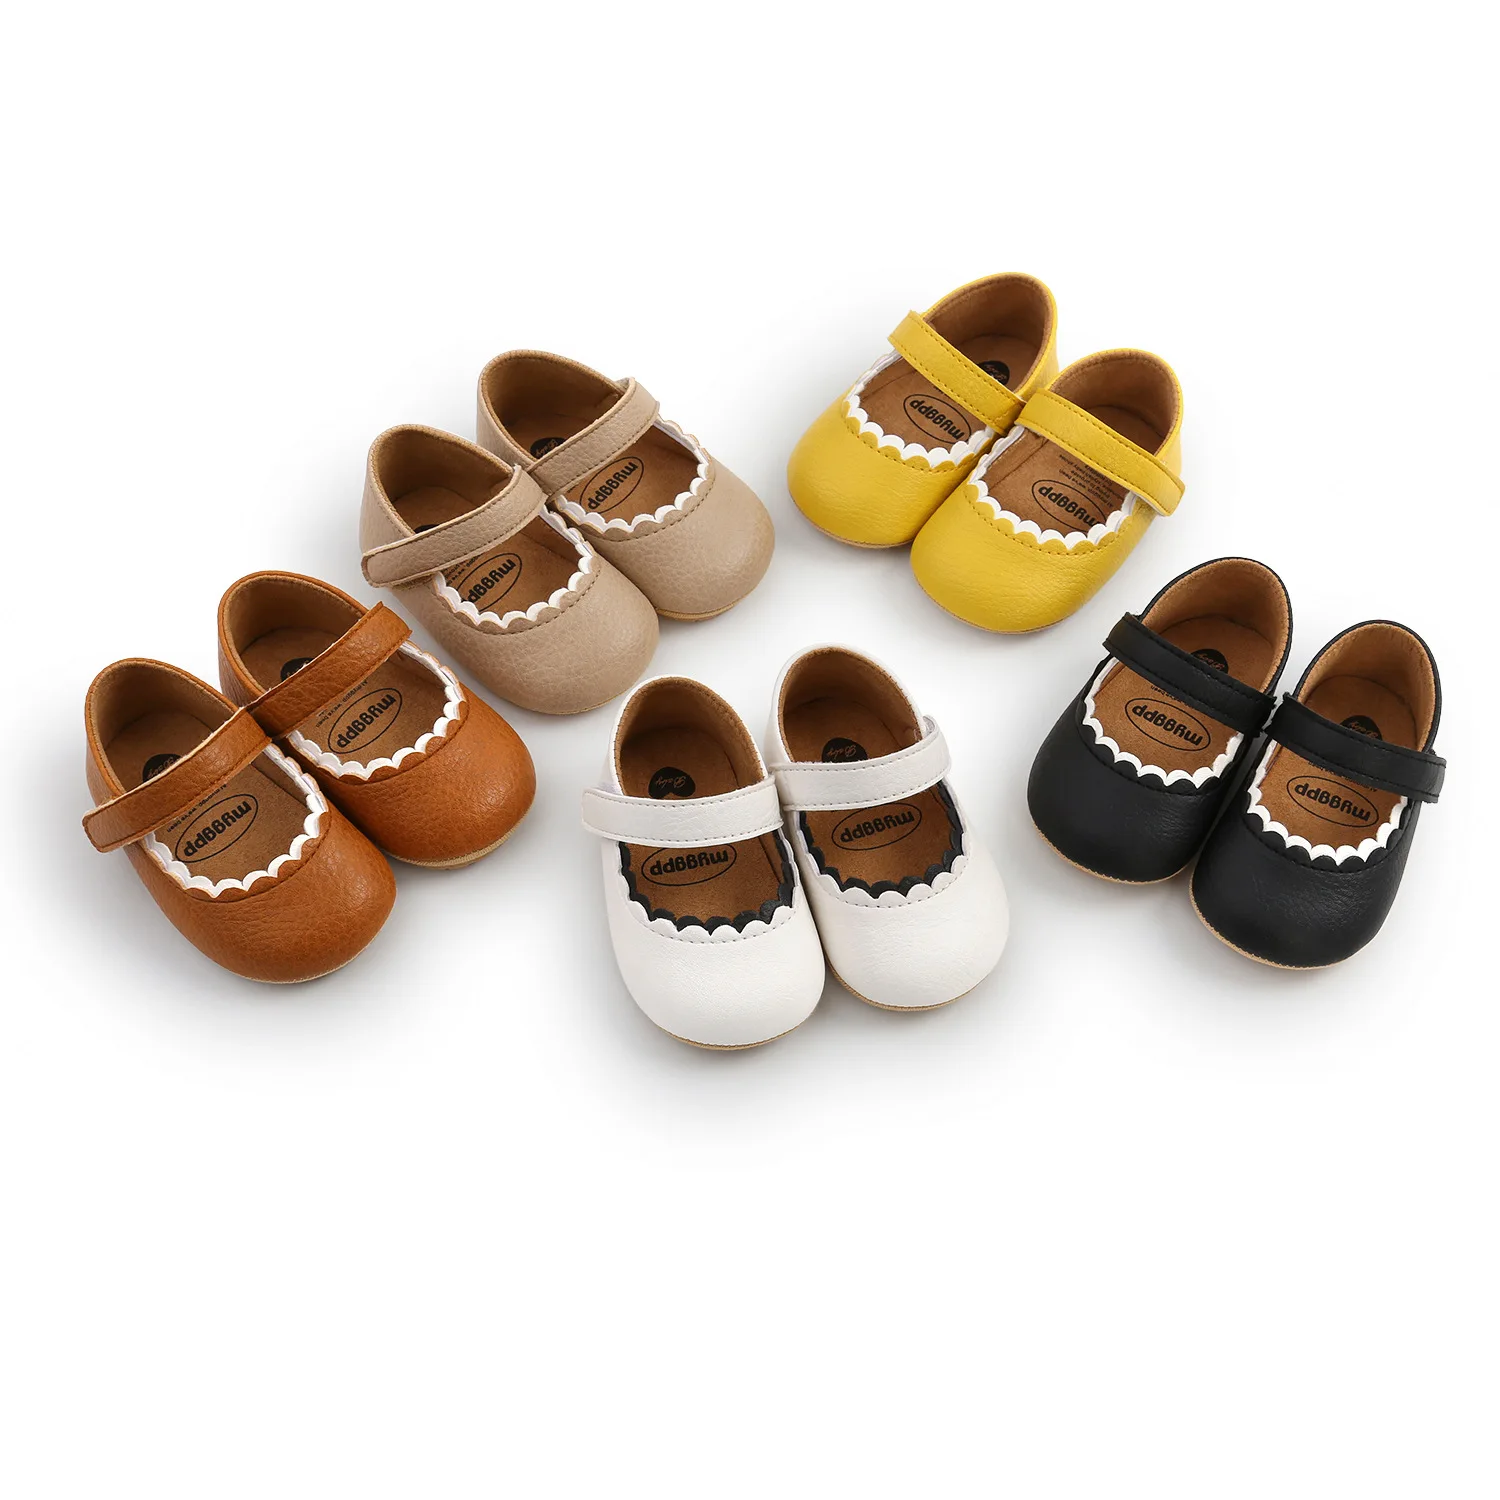 

6249 Toddler Baby PU Leather Infant Newborn Girl First Walkers Shoes Soft Soled Non-slip Footwear Princess Shoes